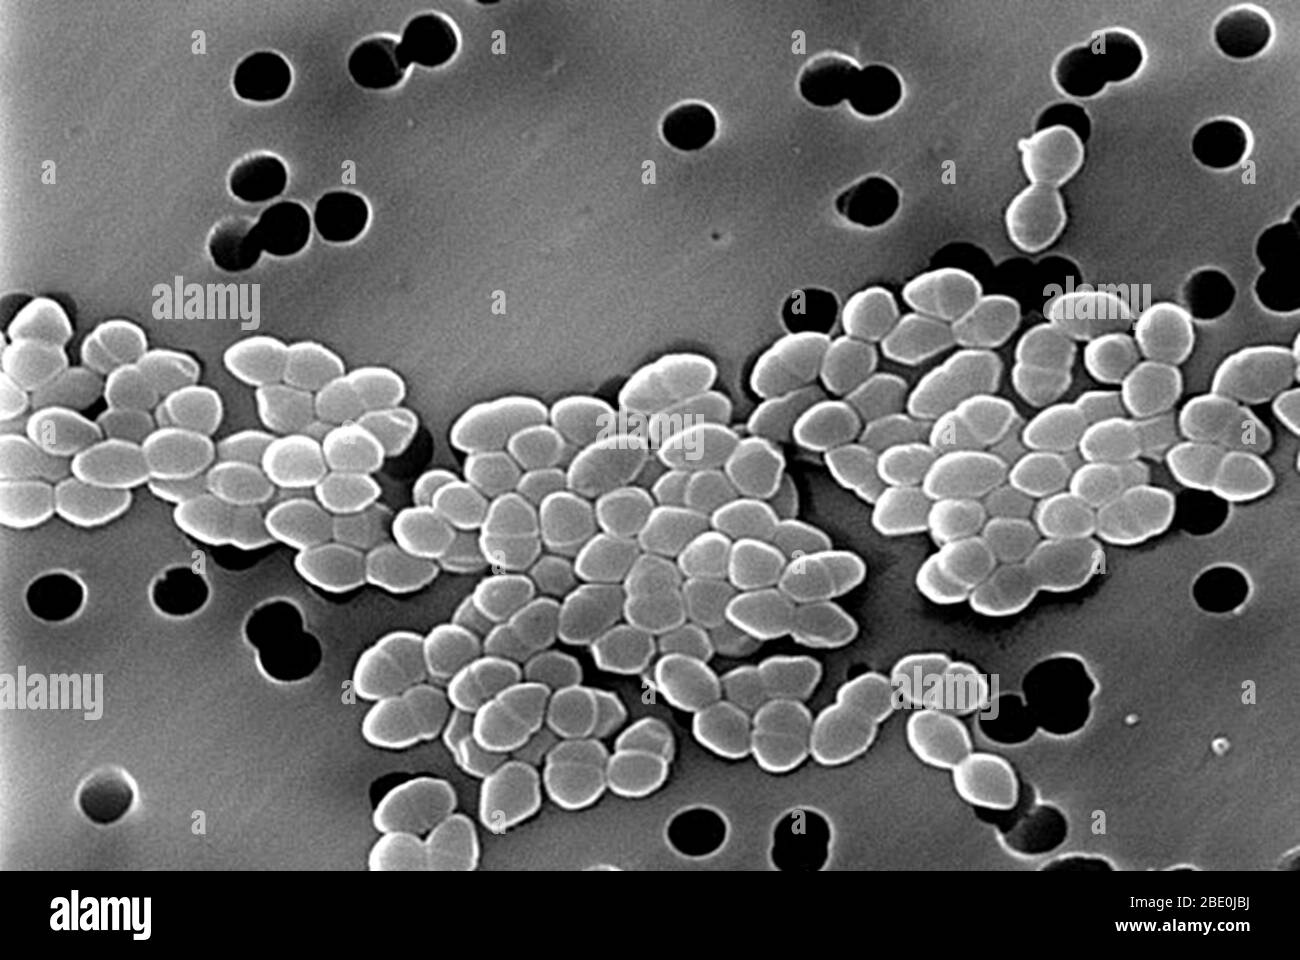 Scanning Electron Micrograph (SEM) of Vancomycin Resistant Enterococci (VRE). Strains of the bacteria, Enterococci, that are resistant to the antibiotic vancomycin, known as Vancomycin Resistant Enterococci, were found in France in 1986. Illness due to VRE infections in healthy people is rare. Common infections caused by enterococci are urinary tract inections and wound infections. Stock Photo